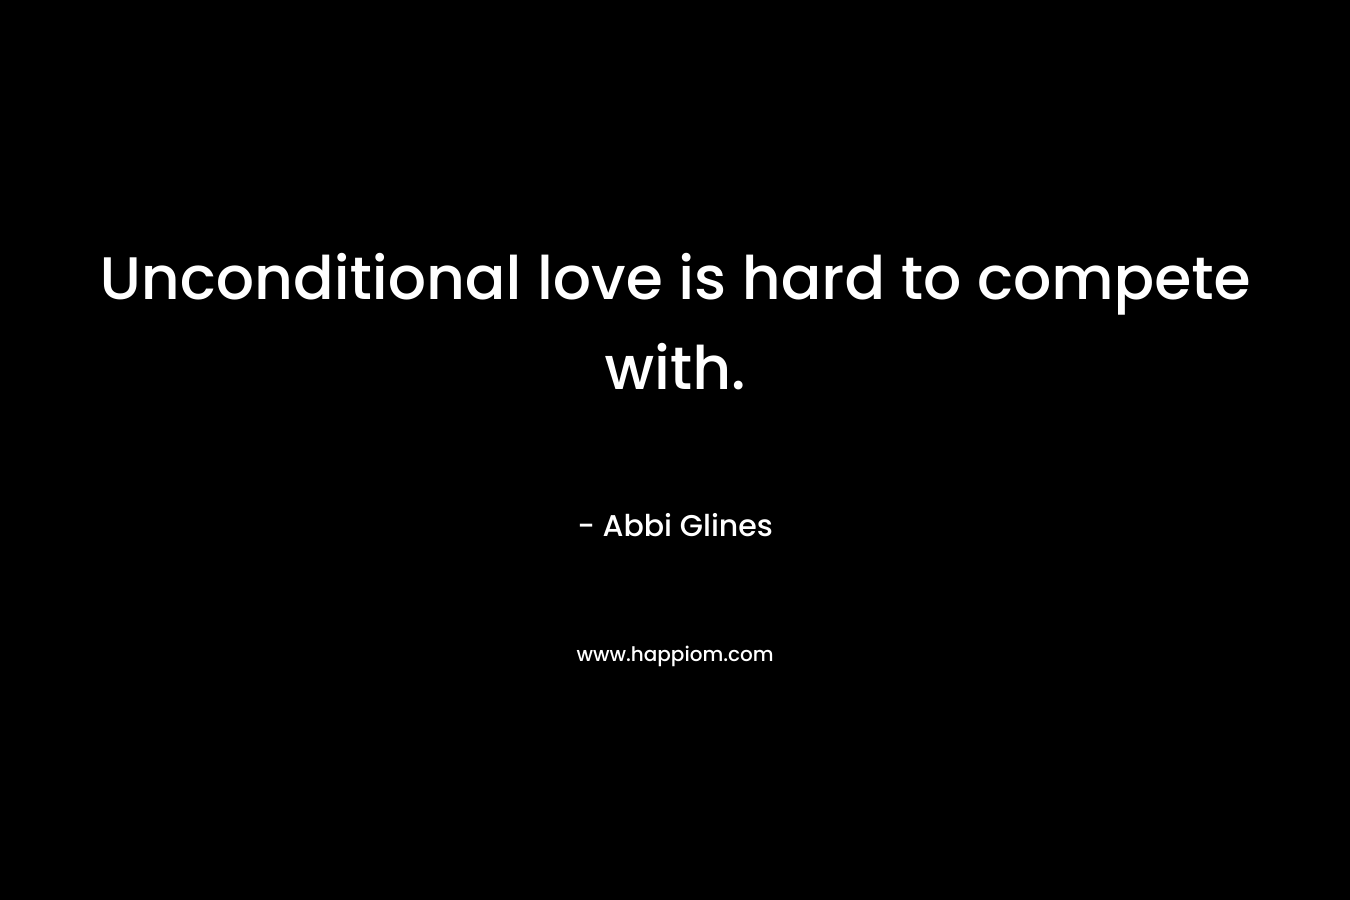 Unconditional love is hard to compete with.